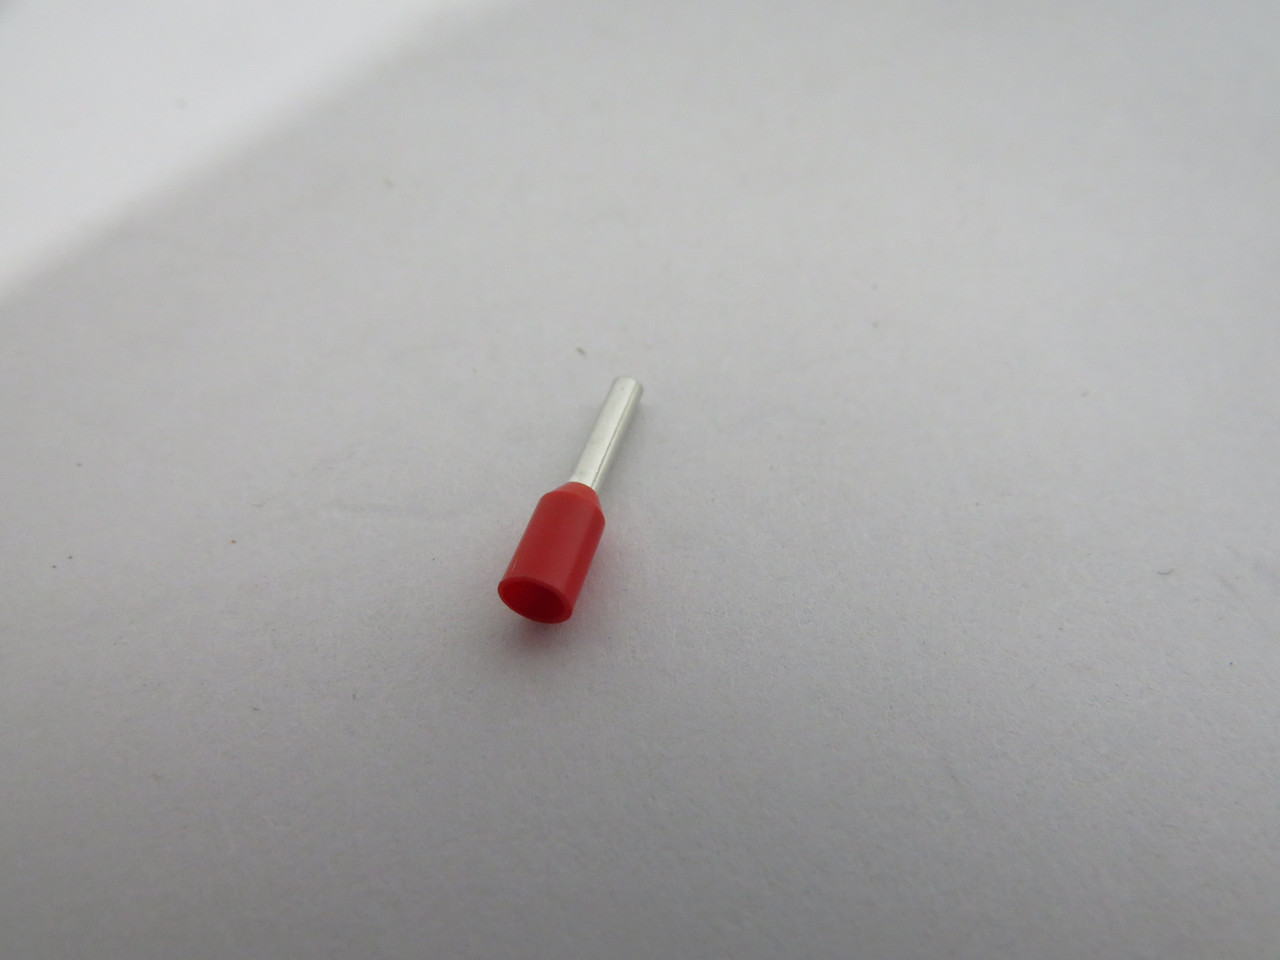 ITC 101.008 Red Single Insulated Ferrule 1.0mm2(18 AWG) 500Pk *Damaged Case* NEW